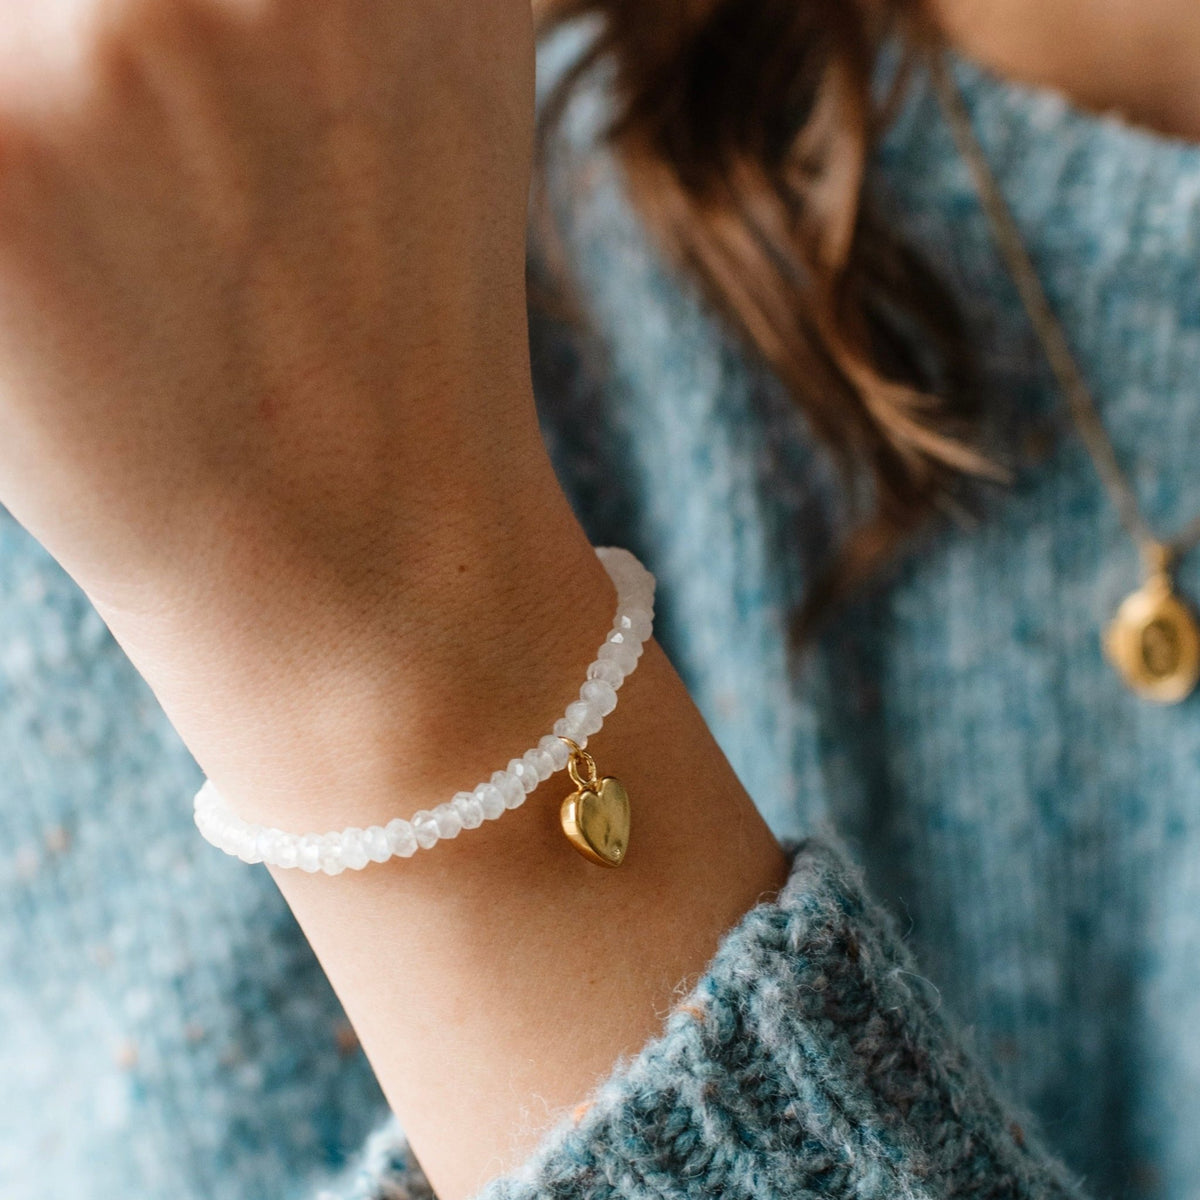 FRAICHE INSPIRE SWEETHEART STRETCH BRACELET - MOONSTONE, MOTHER OF PEARL &amp; GOLD - SO PRETTY CARA COTTER